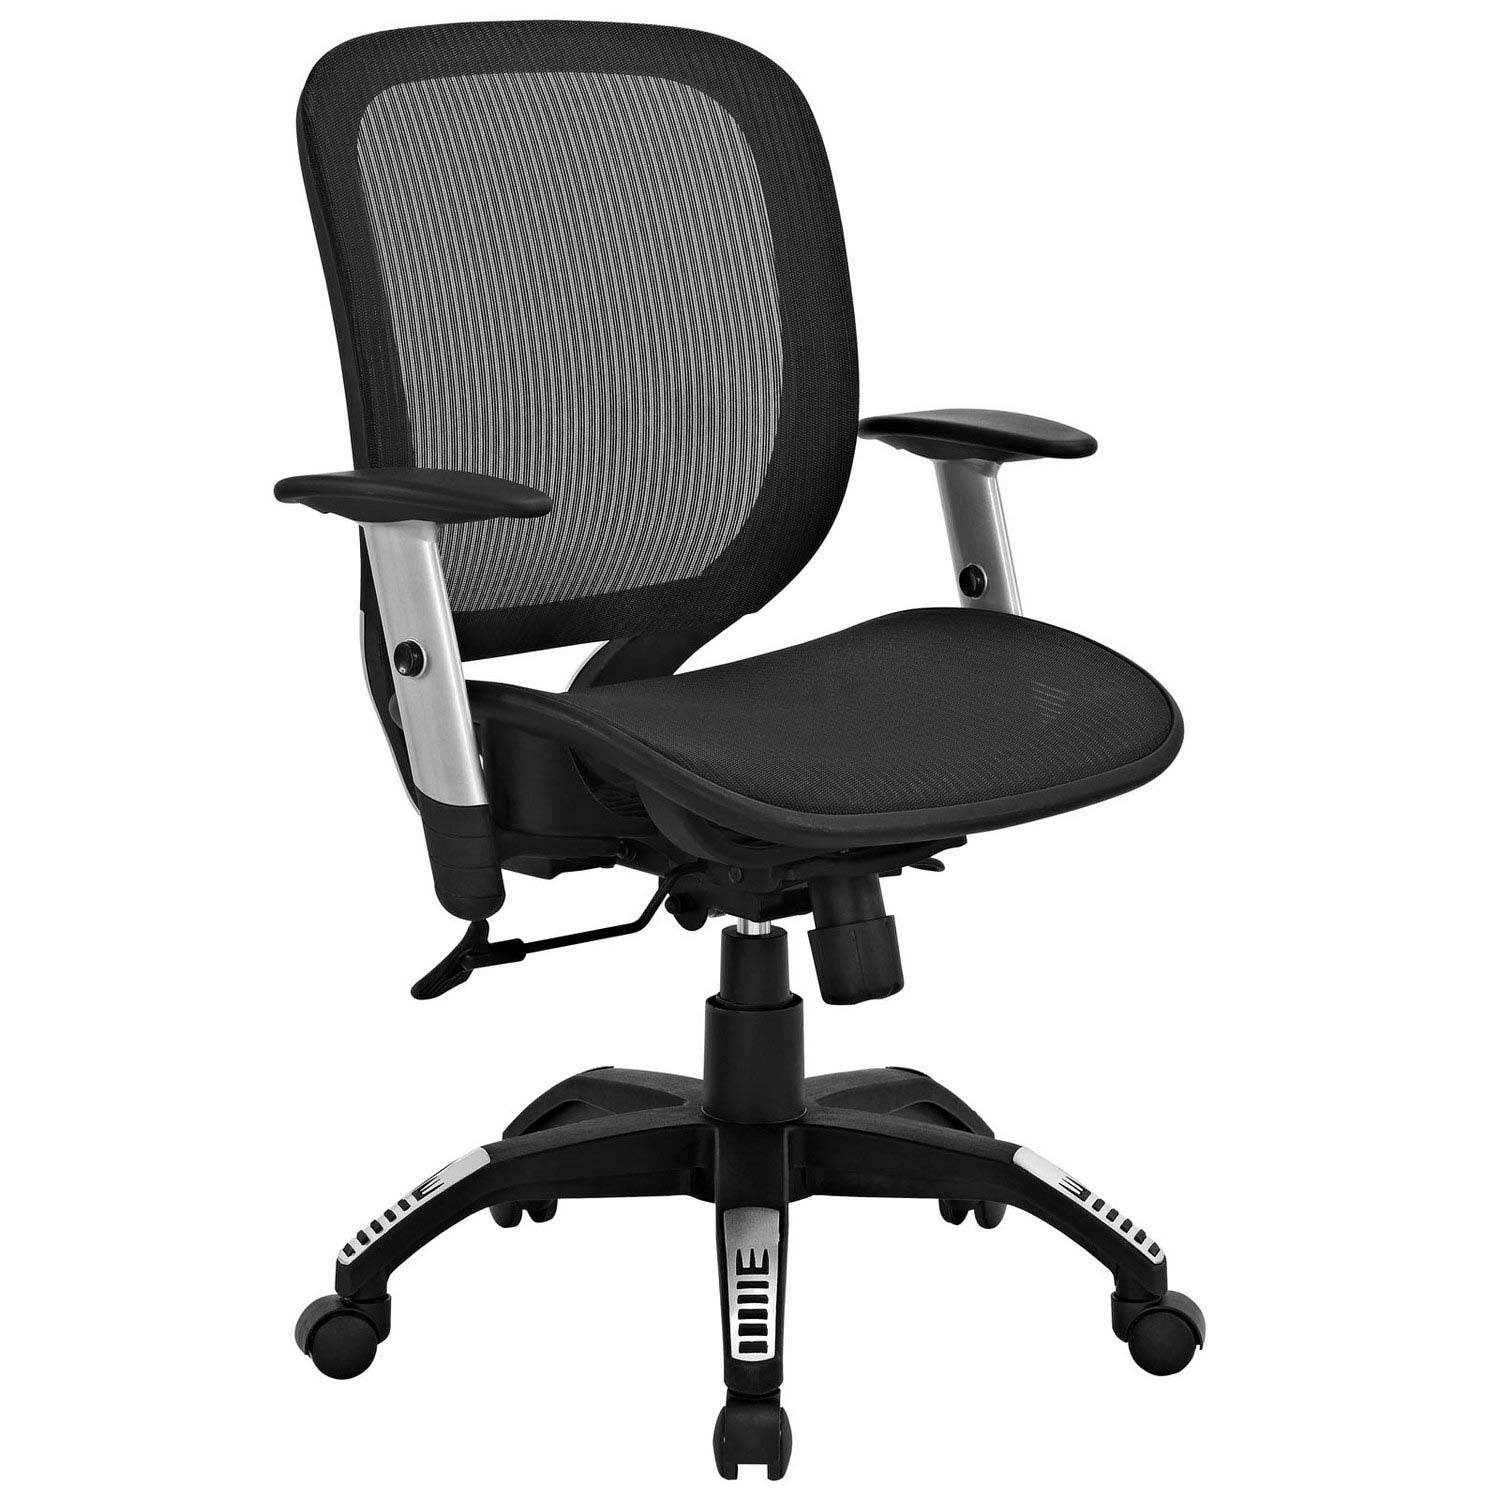 Modway Arillus All Mesh Office Chair - Black